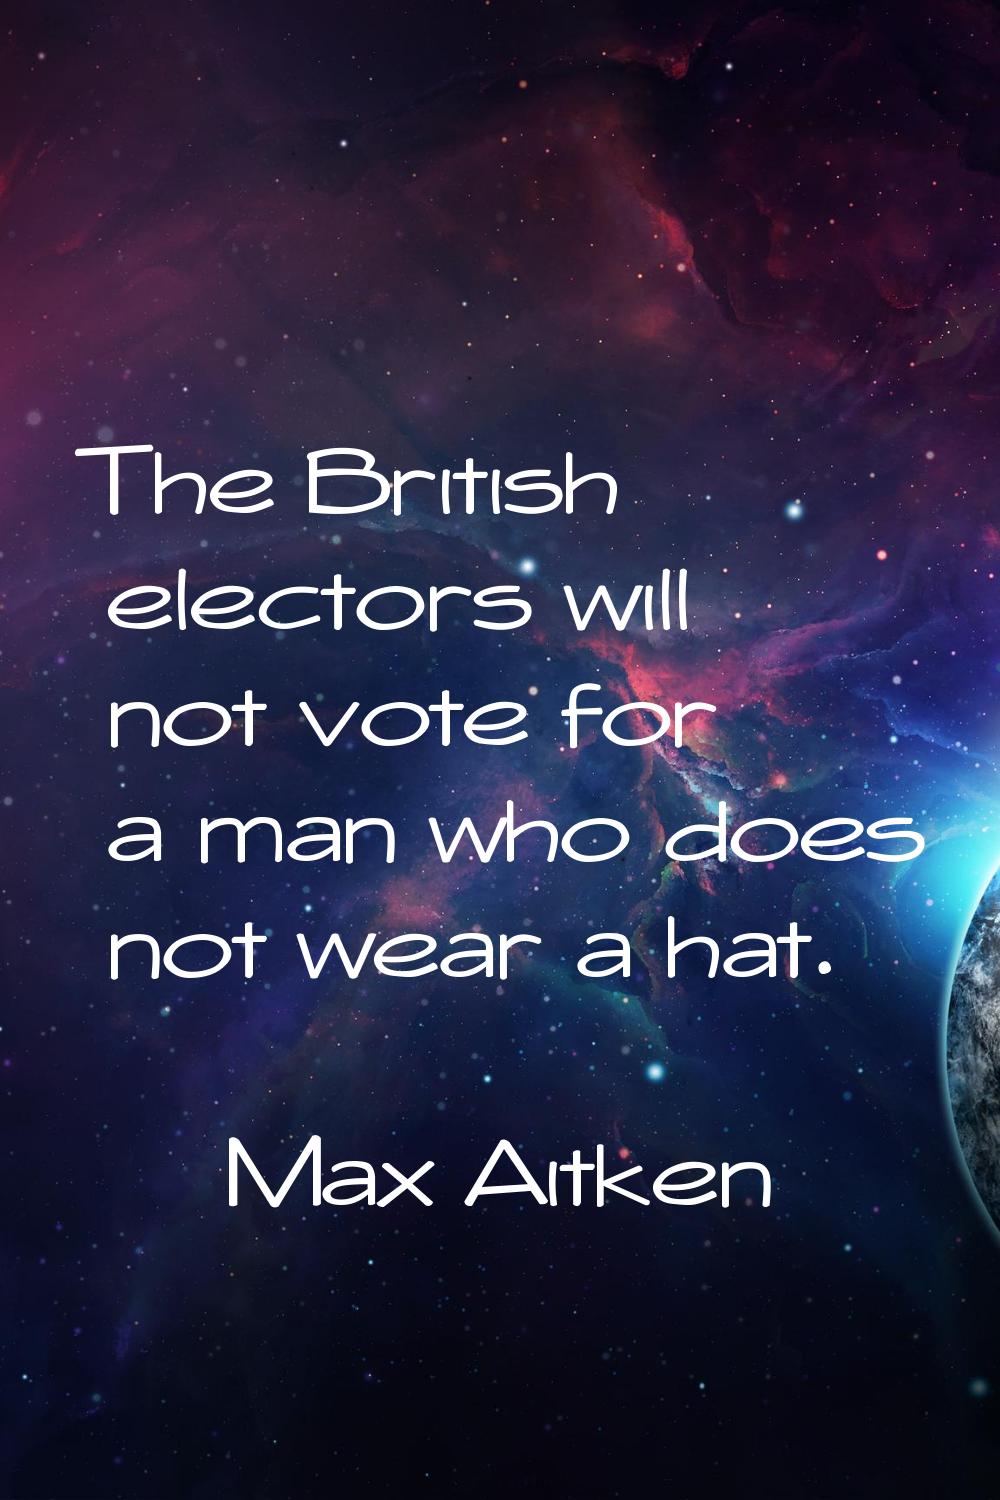 The British electors will not vote for a man who does not wear a hat.